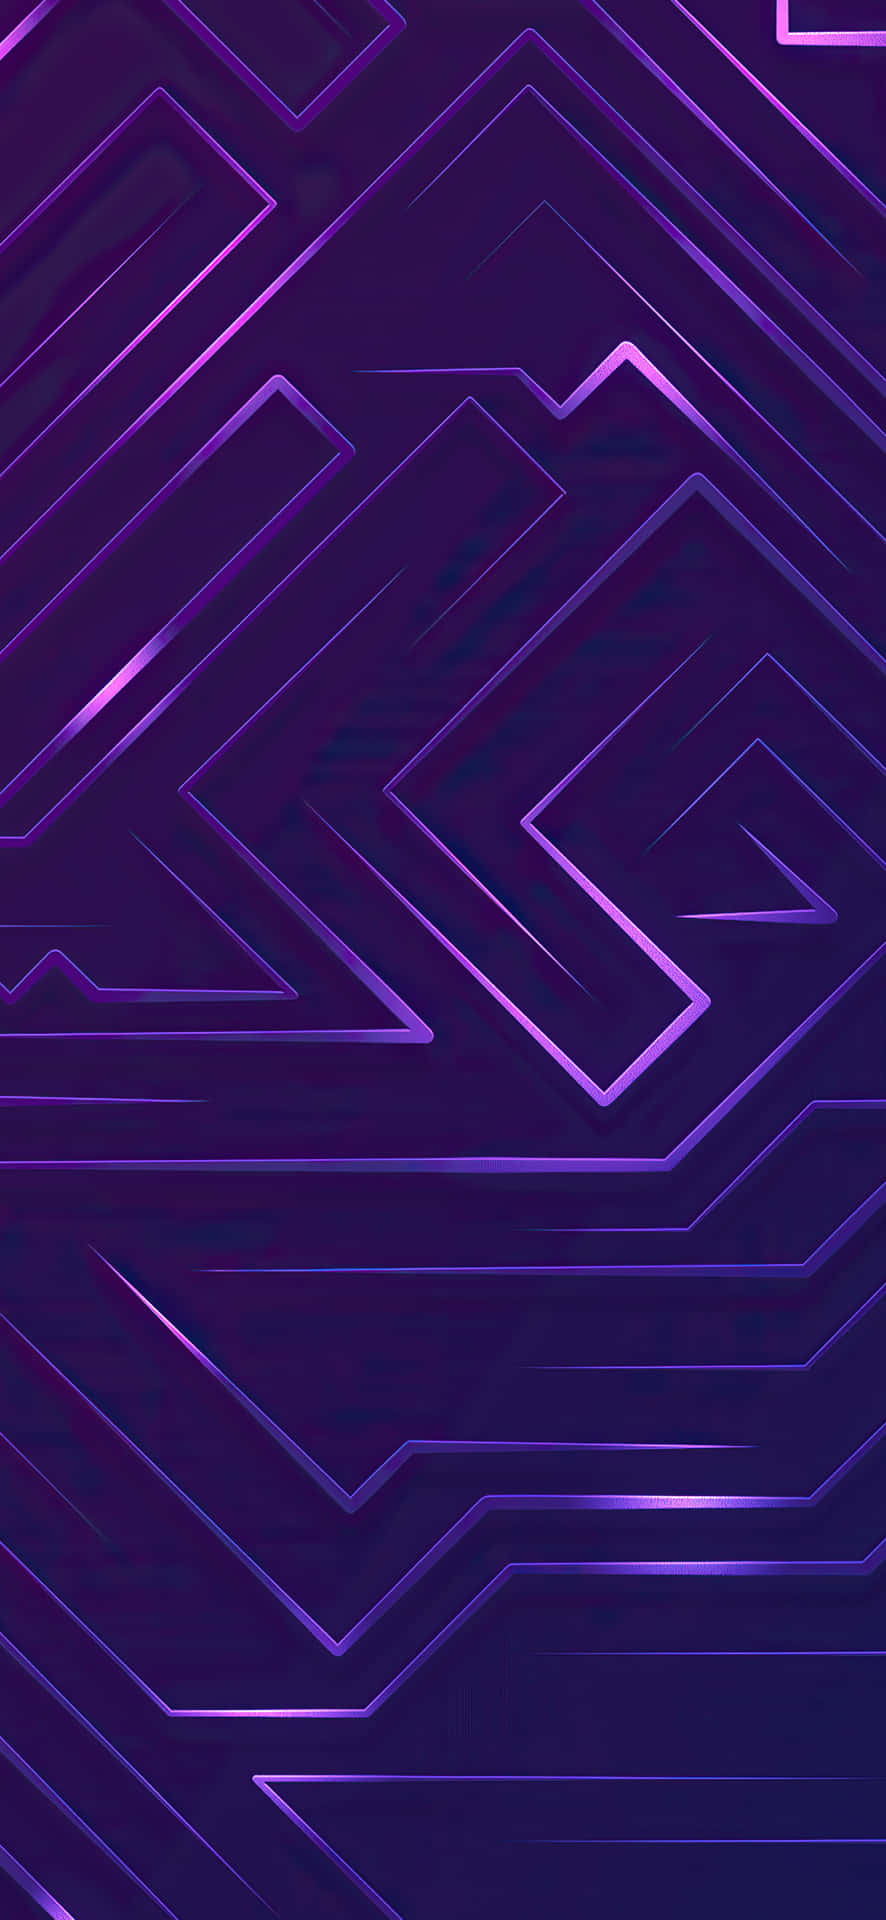 Abstract Purple Arrows Background Wallpaper